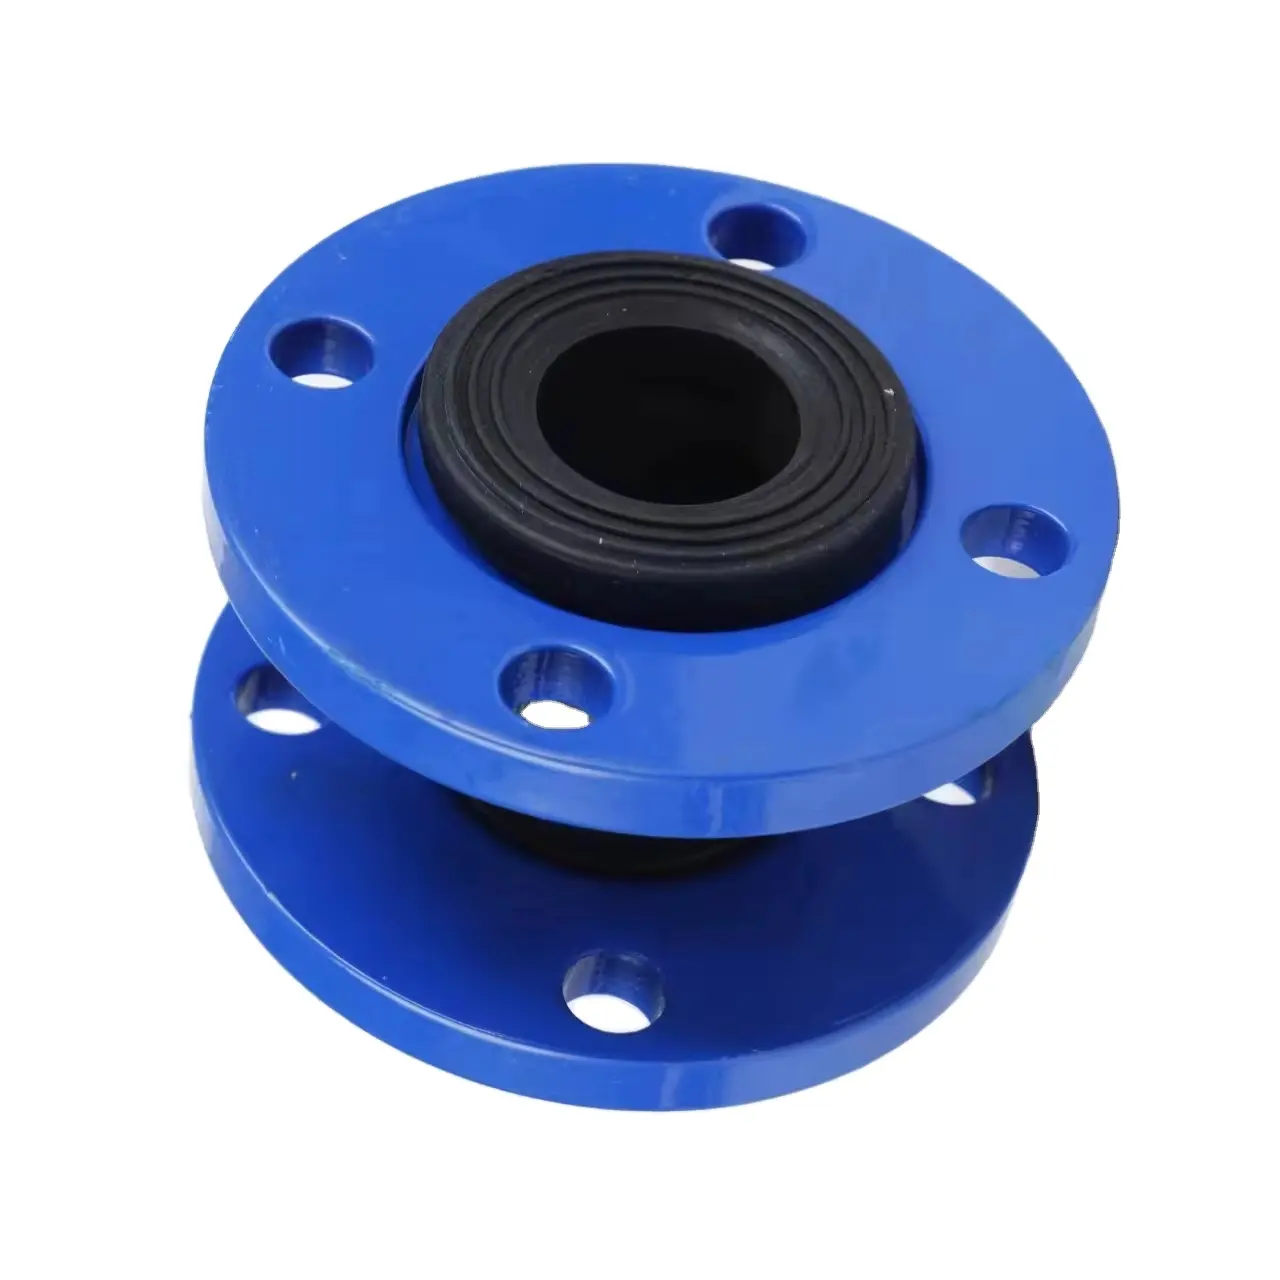 Flanged Ductile Cast Steel Rubber Bellows Are Used For Pipe Expansion Flexible Joints